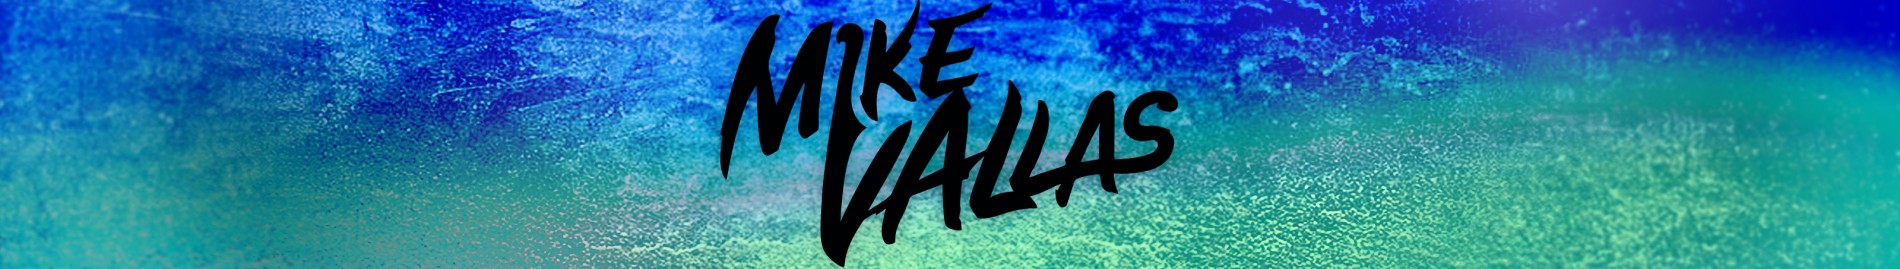 Mike Vallas